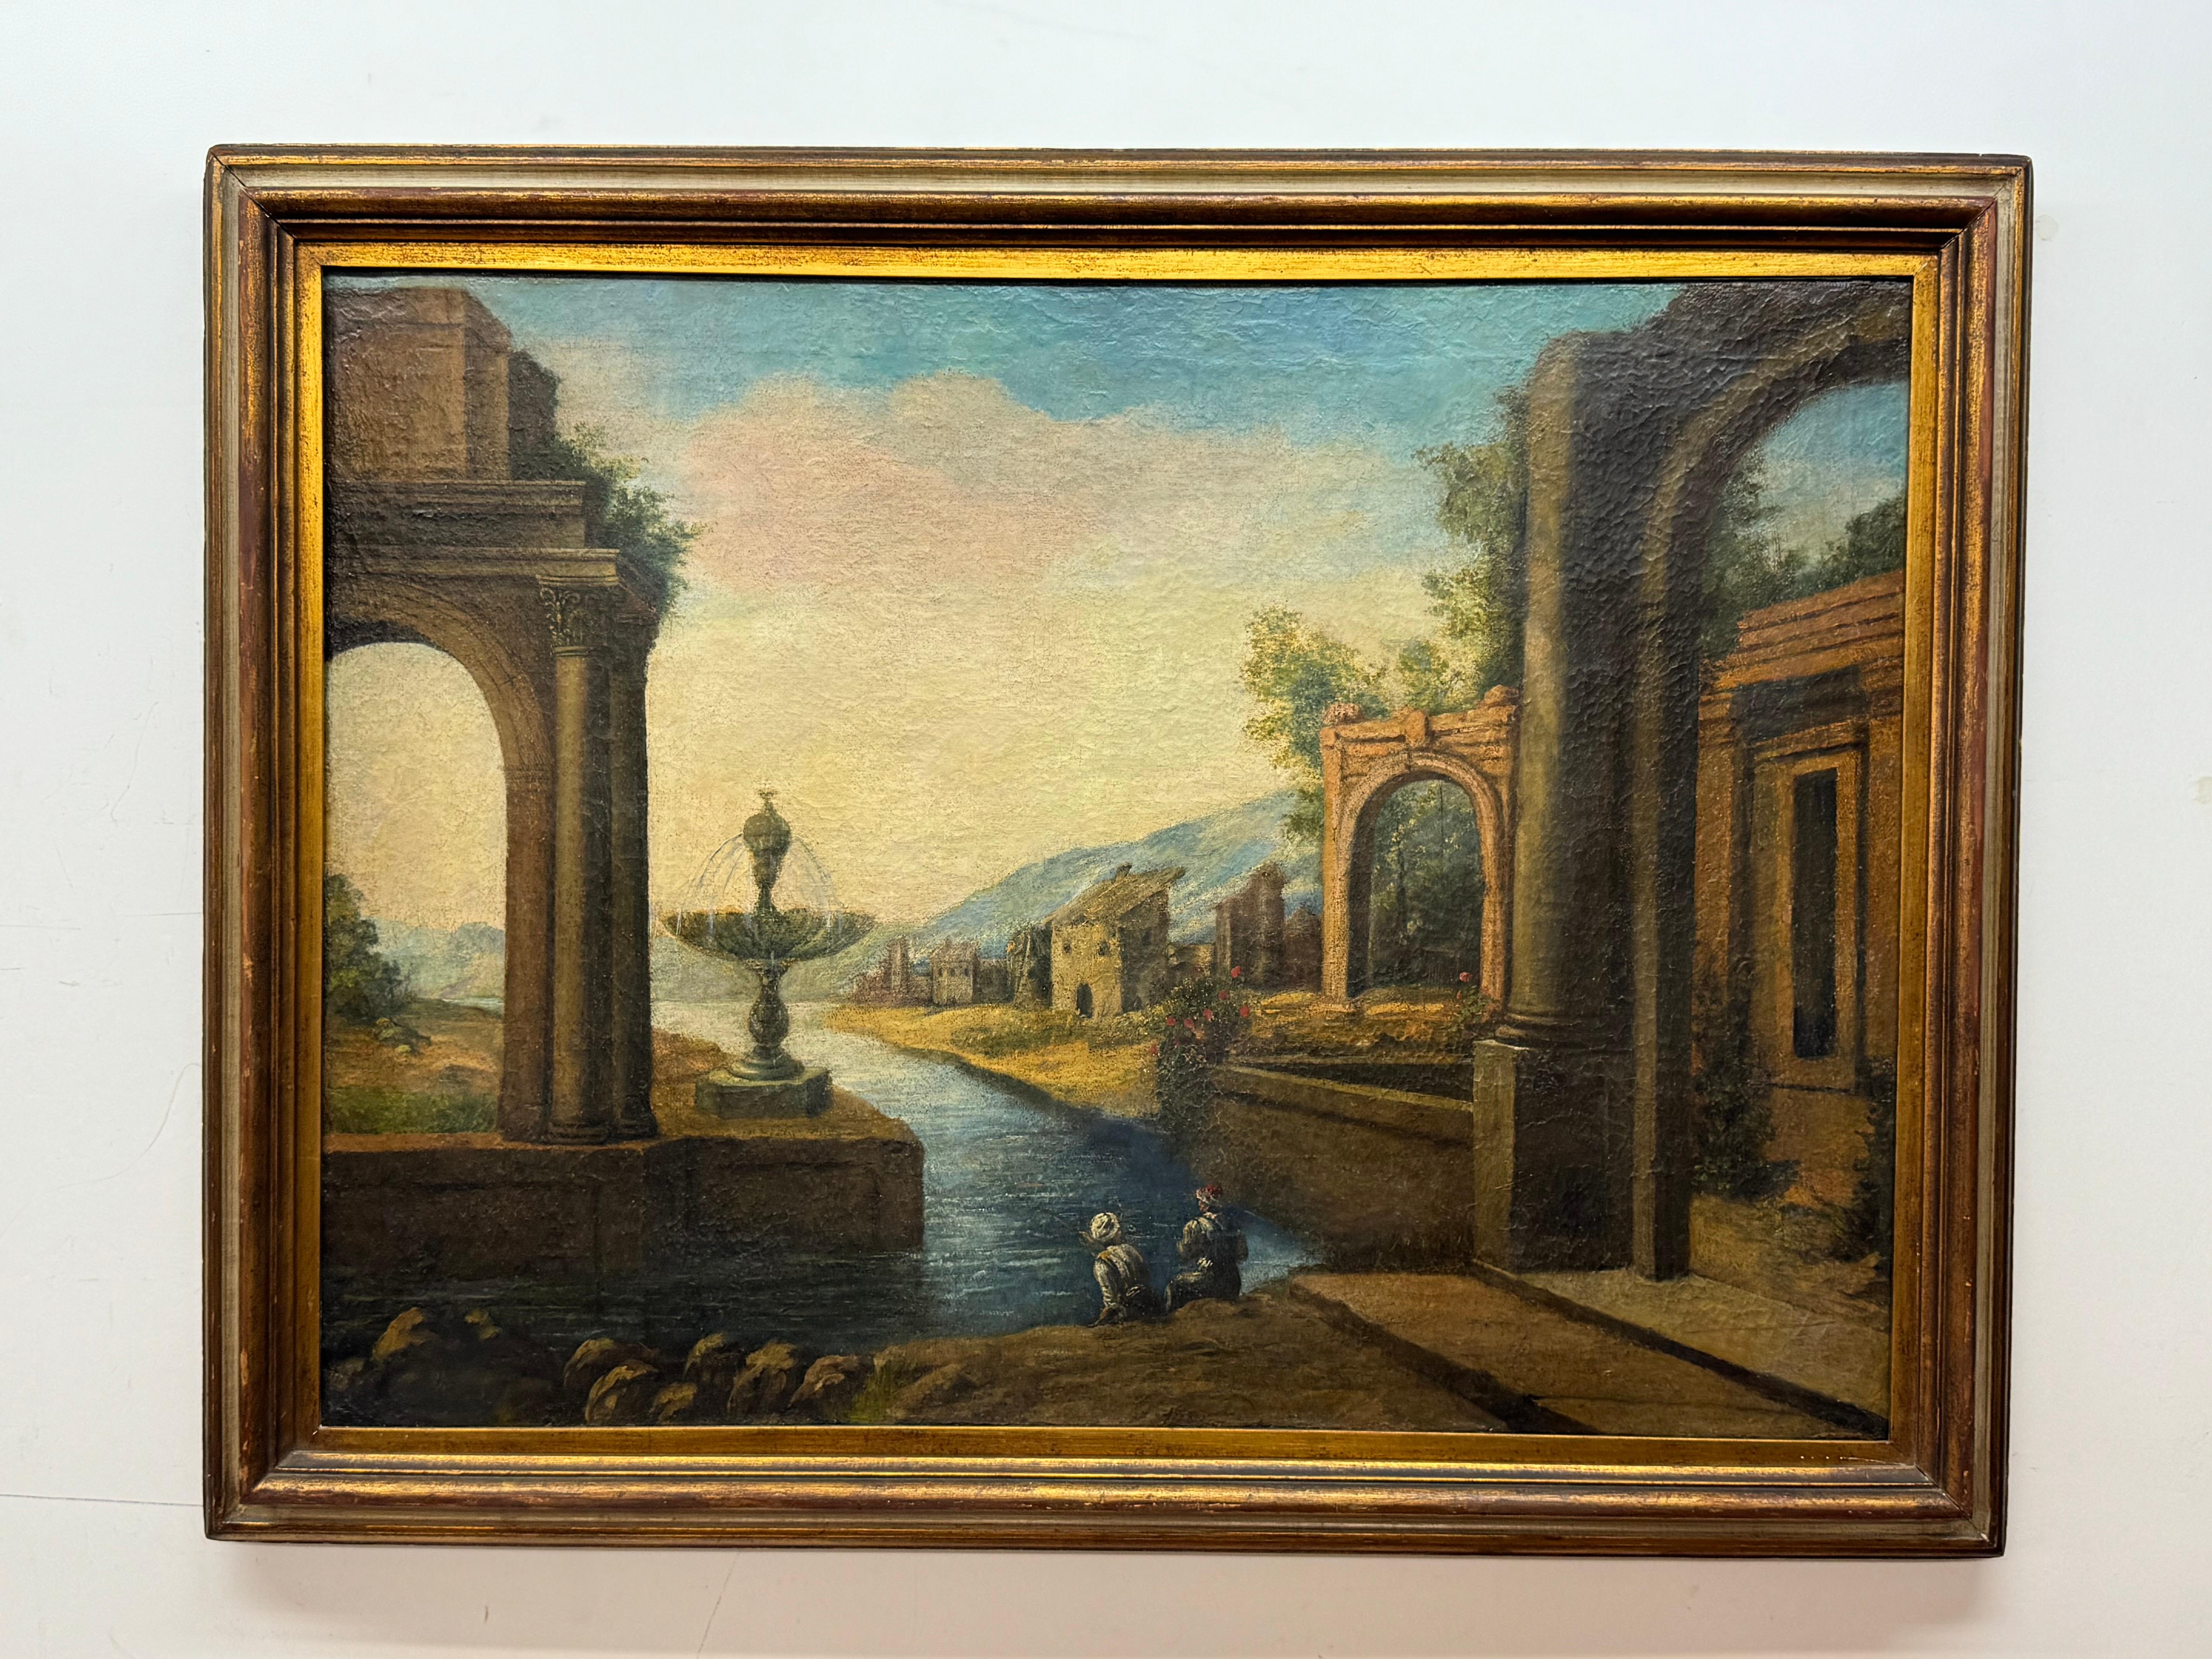 Unknown Landscape Painting - Early 20th century, Italian Mediterranean landscape with two figures fishing